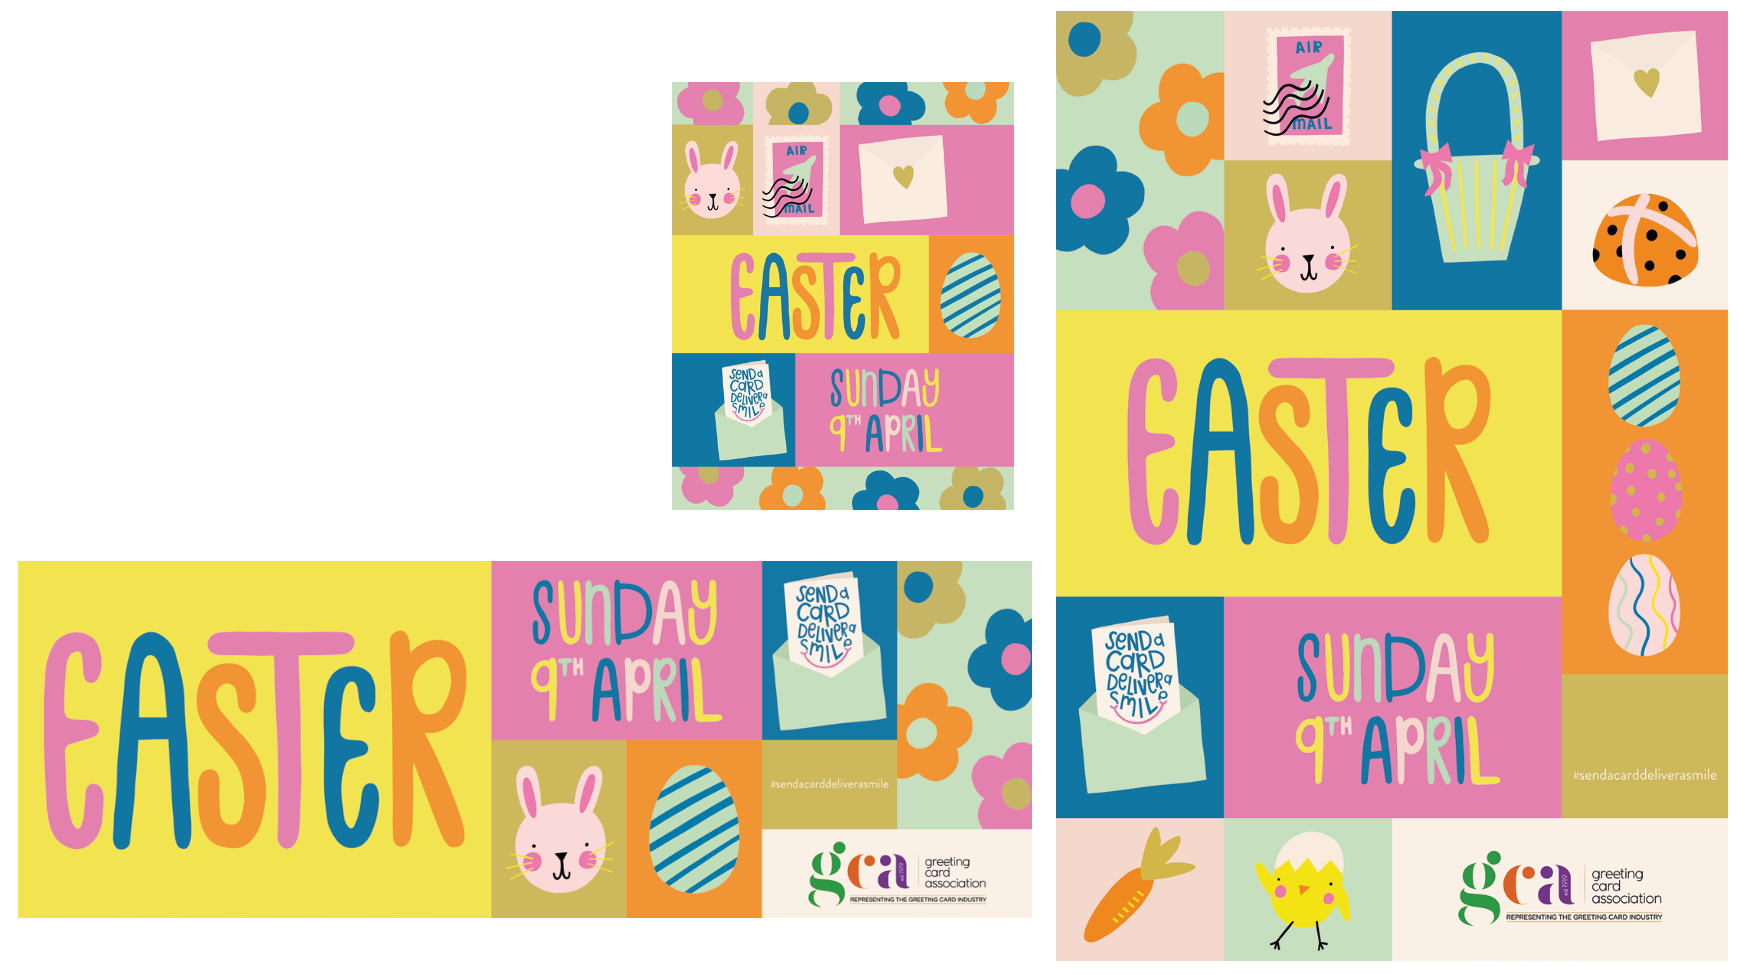 Above: The Easter artwork shows the variety of sizes